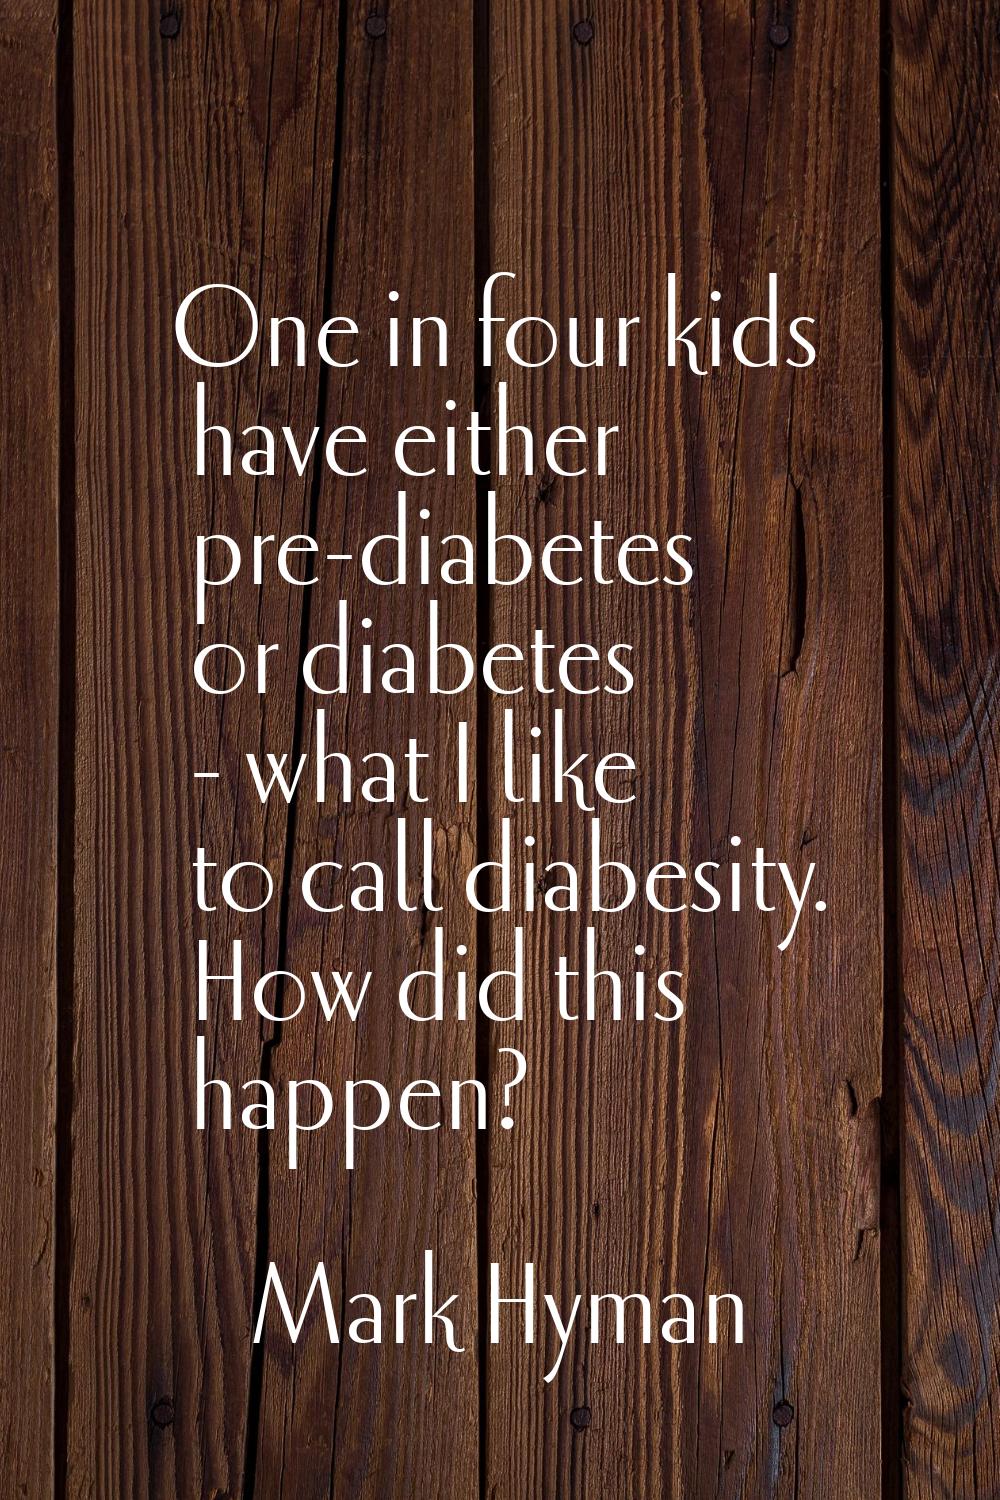 One in four kids have either pre-diabetes or diabetes - what I like to call diabesity. How did this